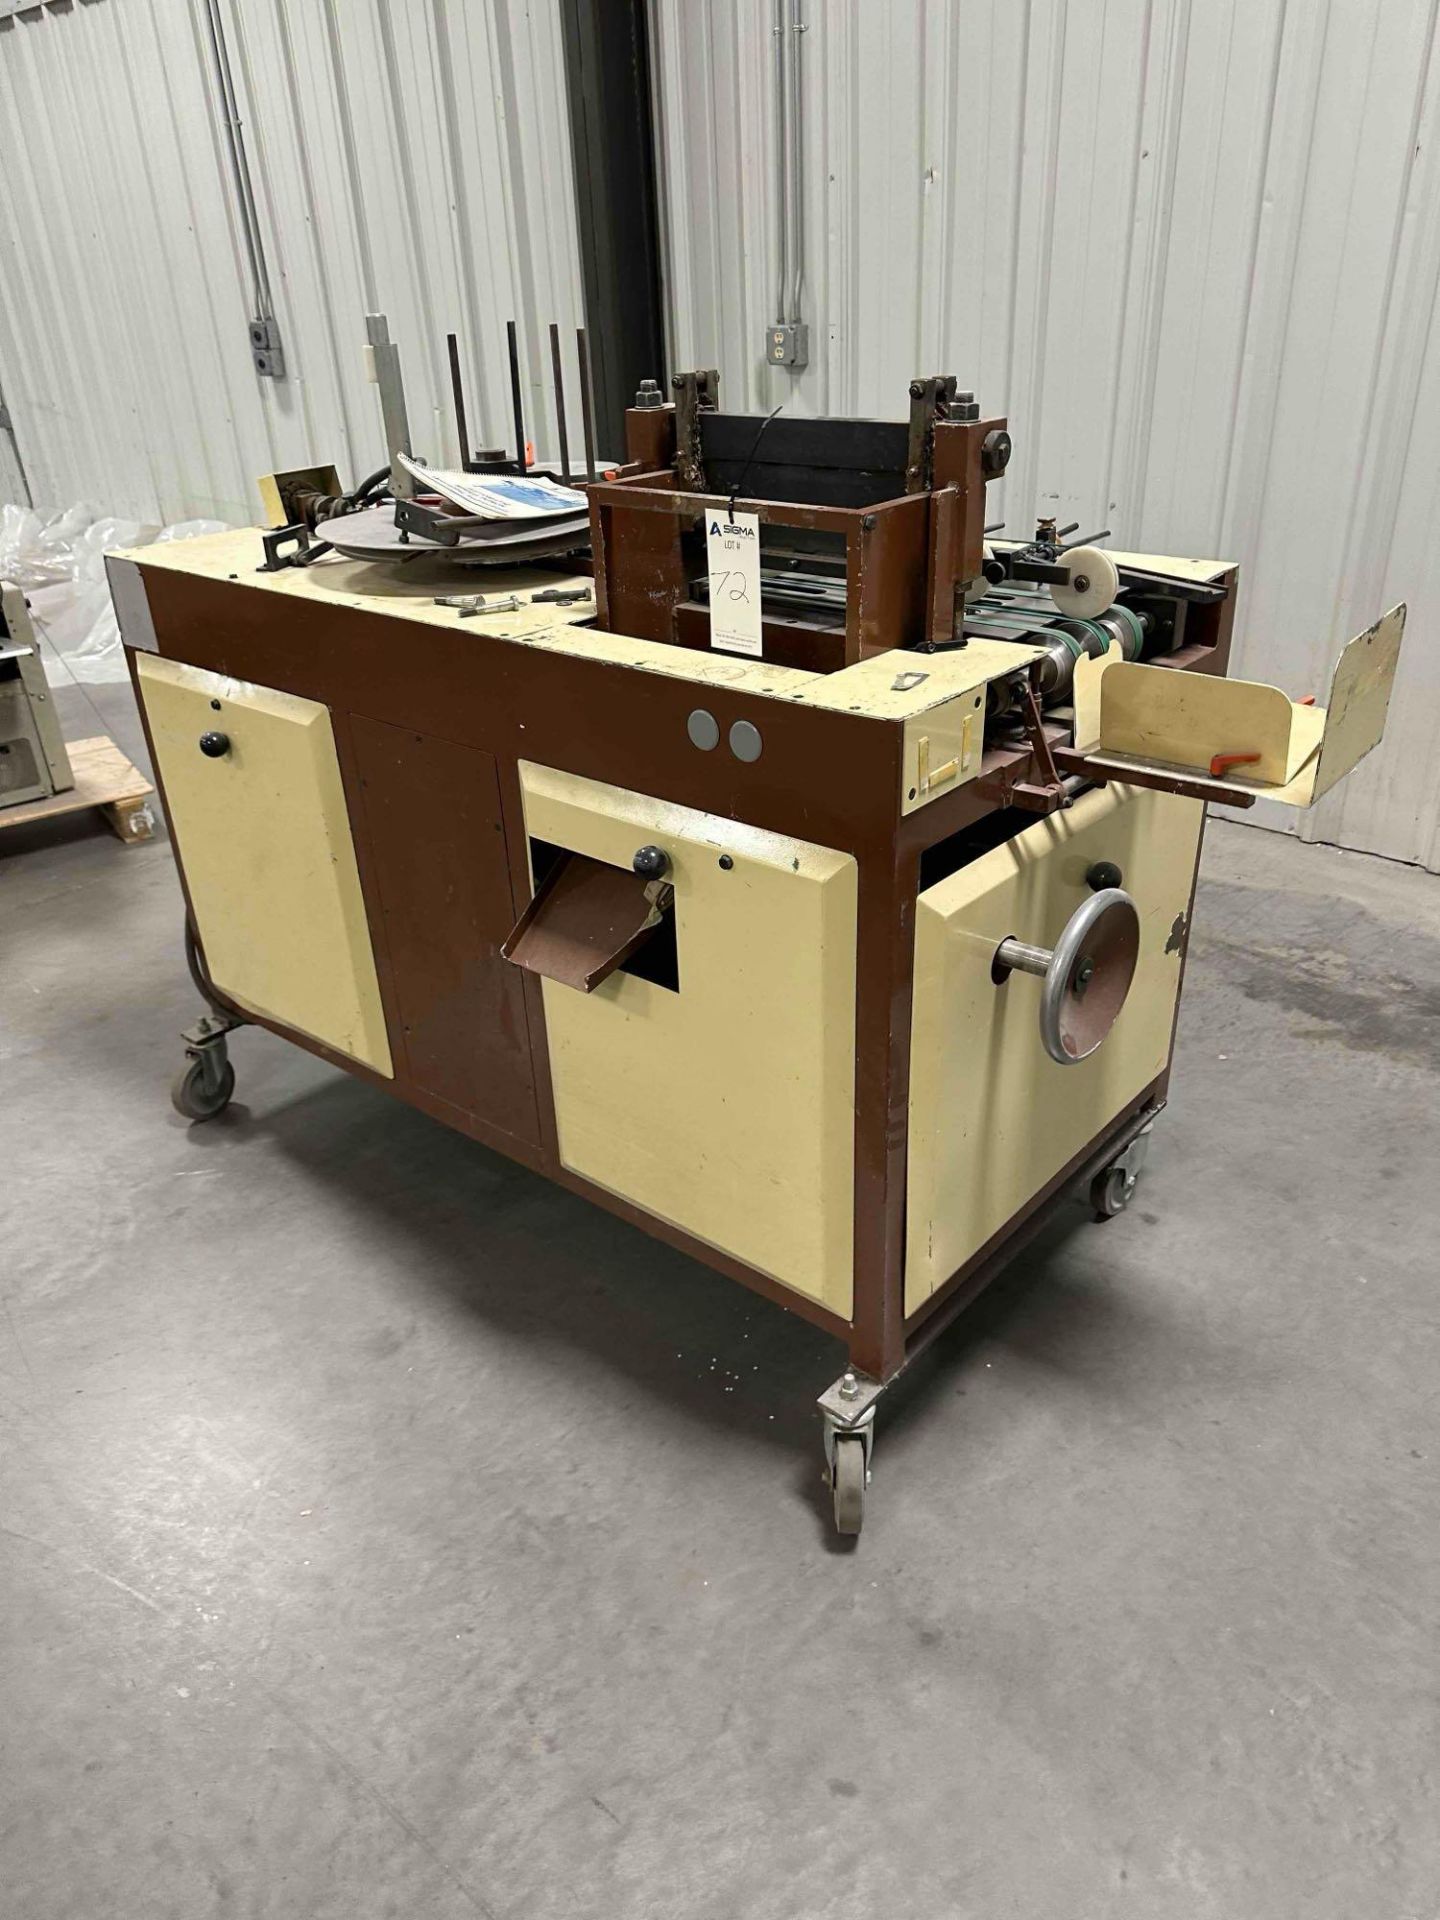 Sickinger automated speed punch - model ASP 13